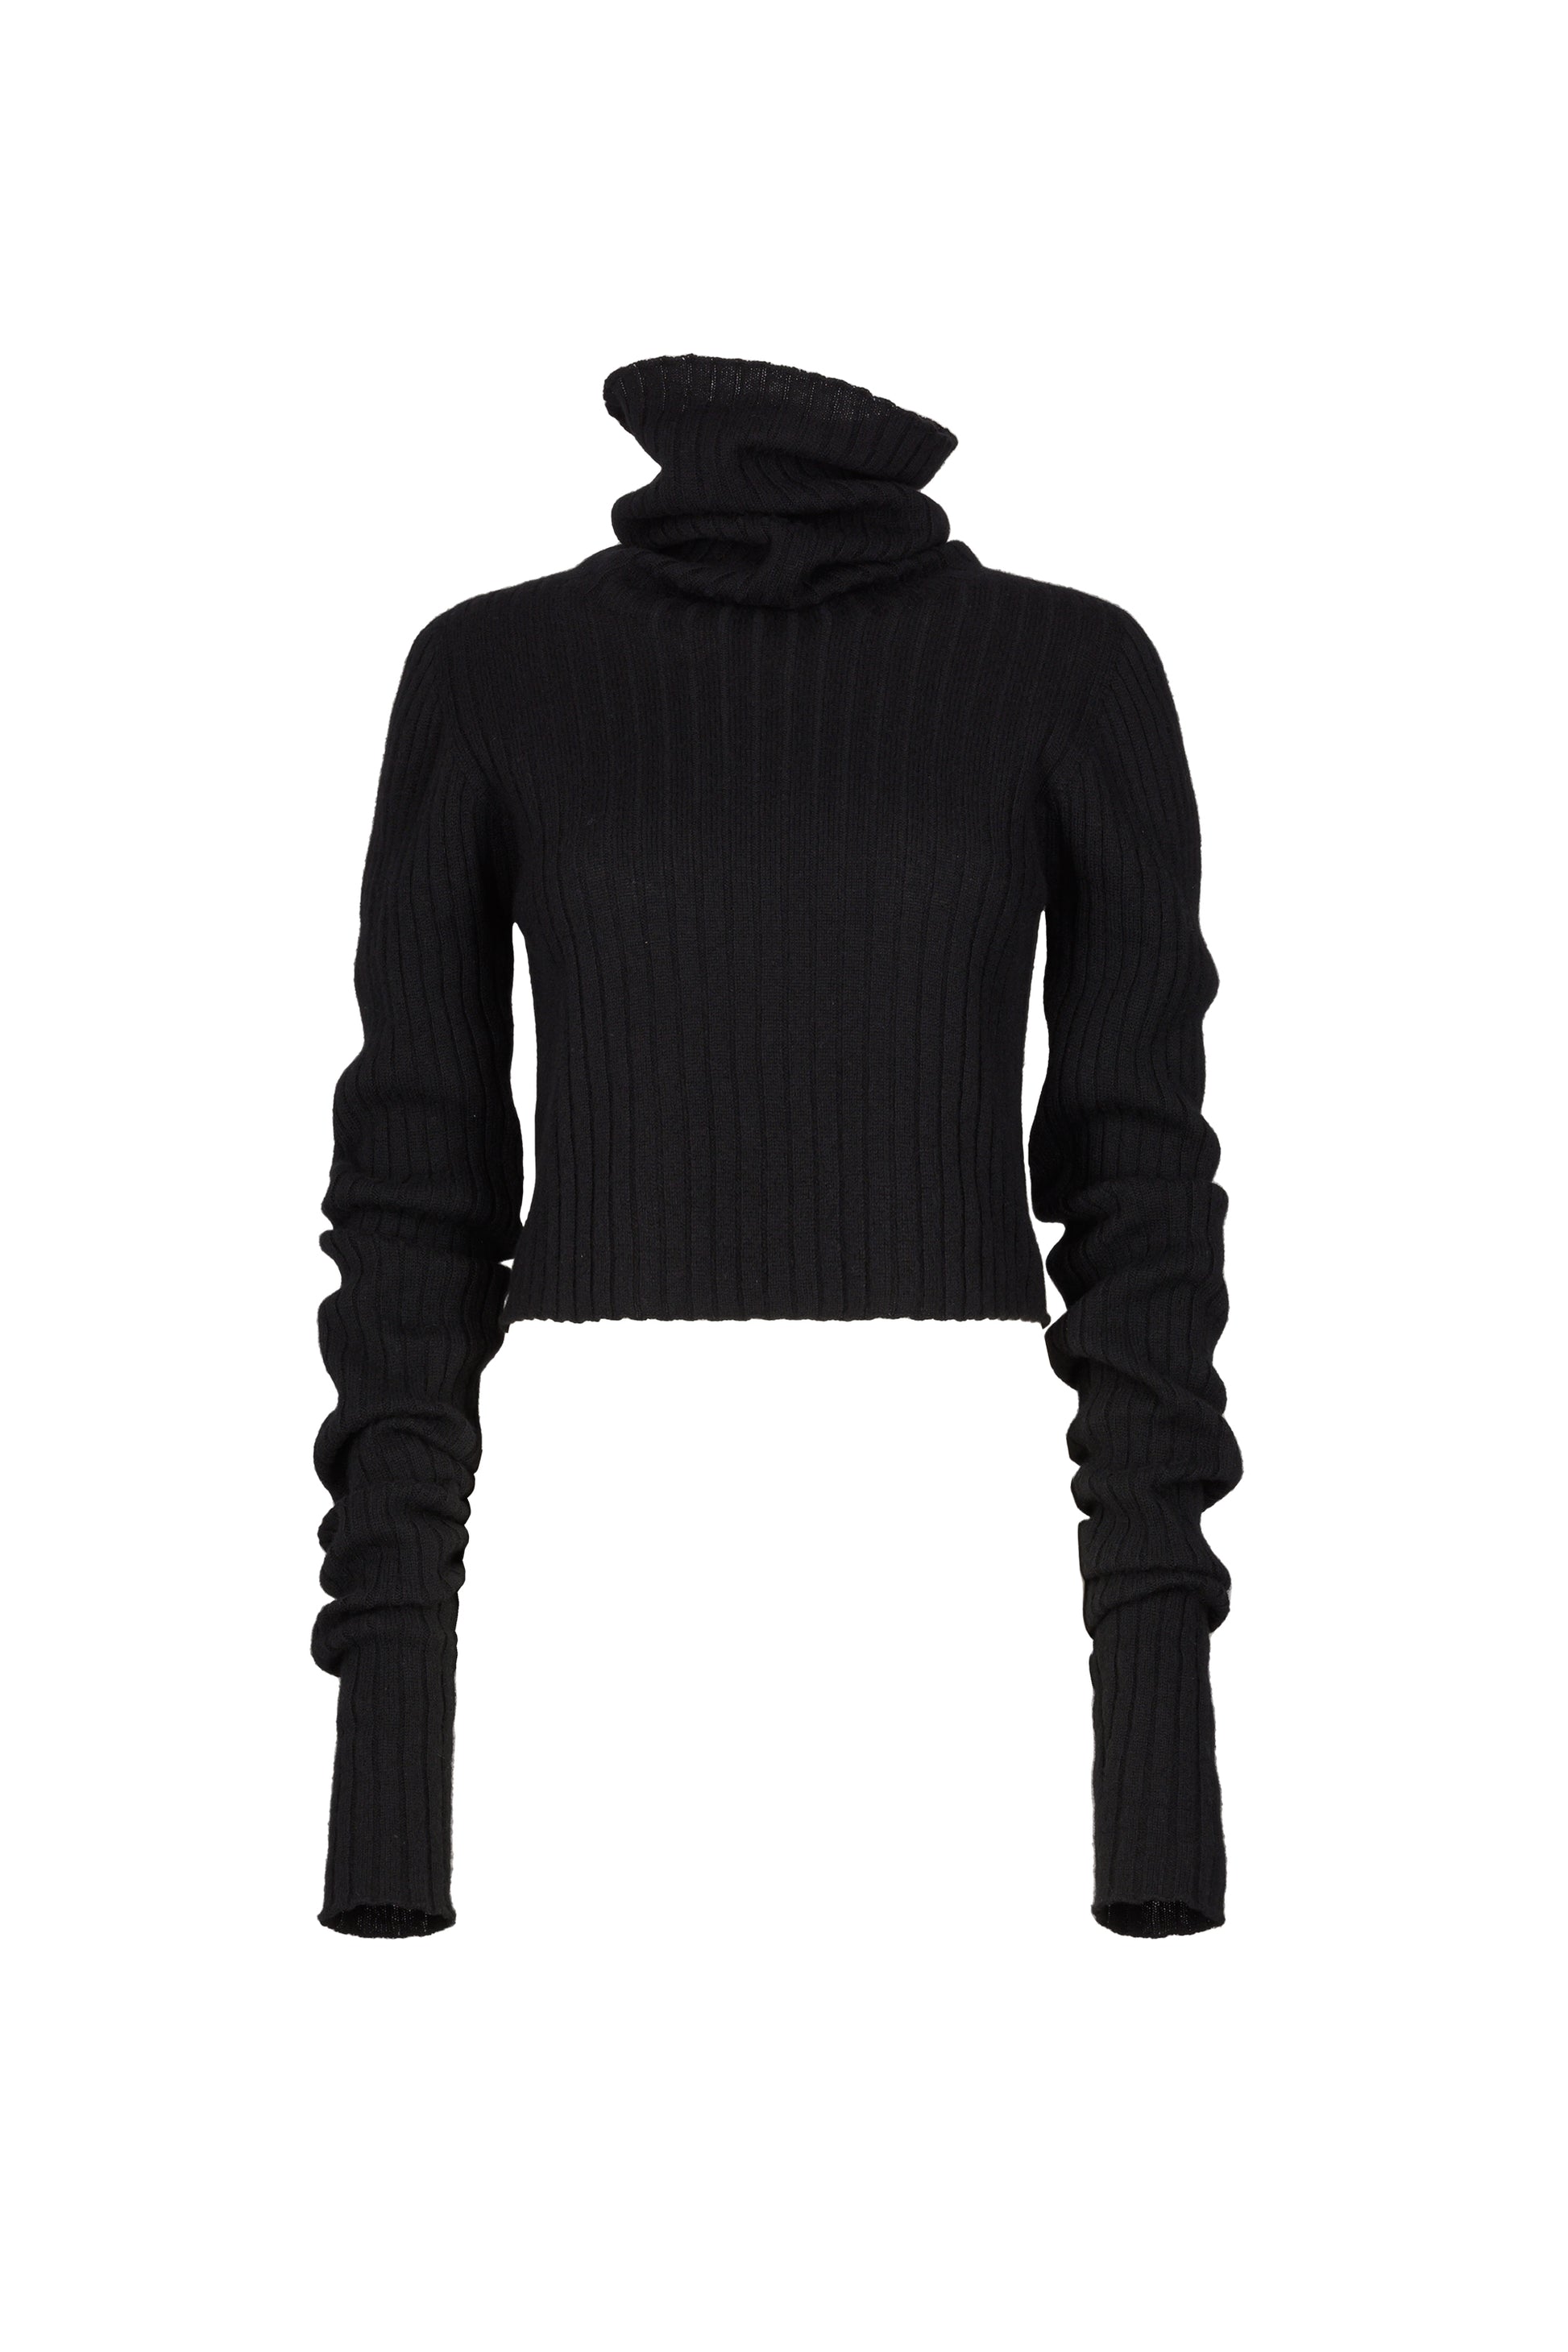 Sleek black cropped knit turtleneck sweater with elongated sleeves, offering a modern and stylish addition to the chic winter wardrobe